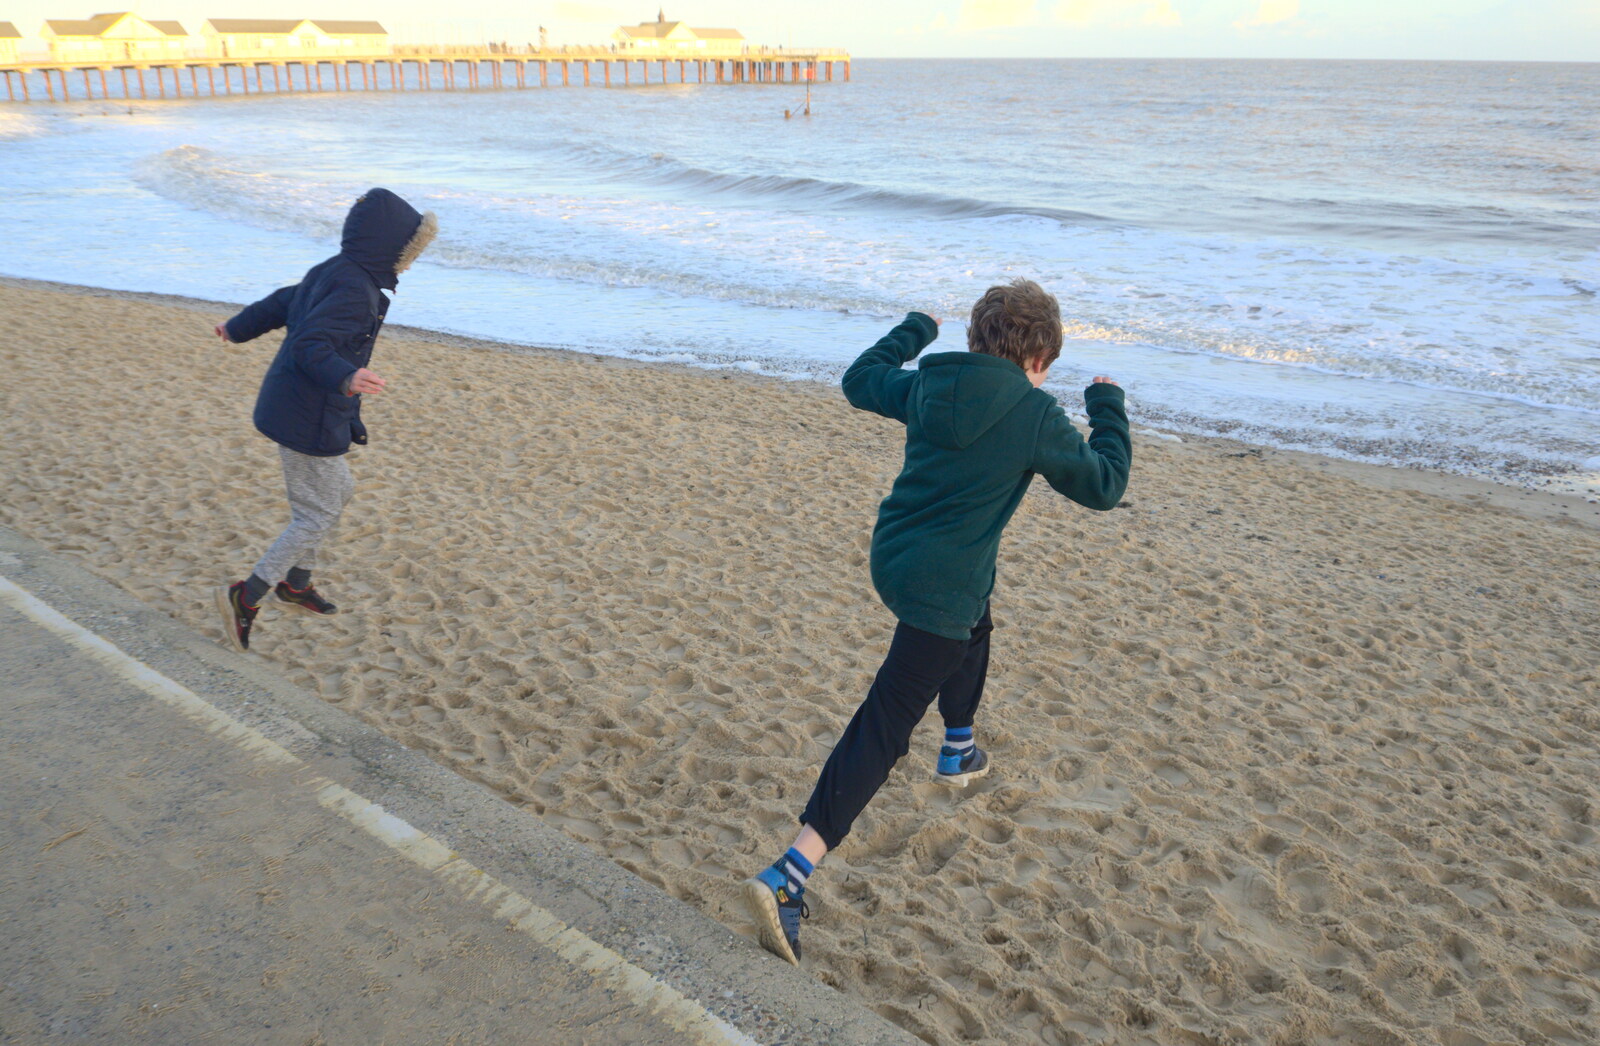 The boys have one more leap from A Return to the Beach, Southwold, Suffolk - 20th December 2020